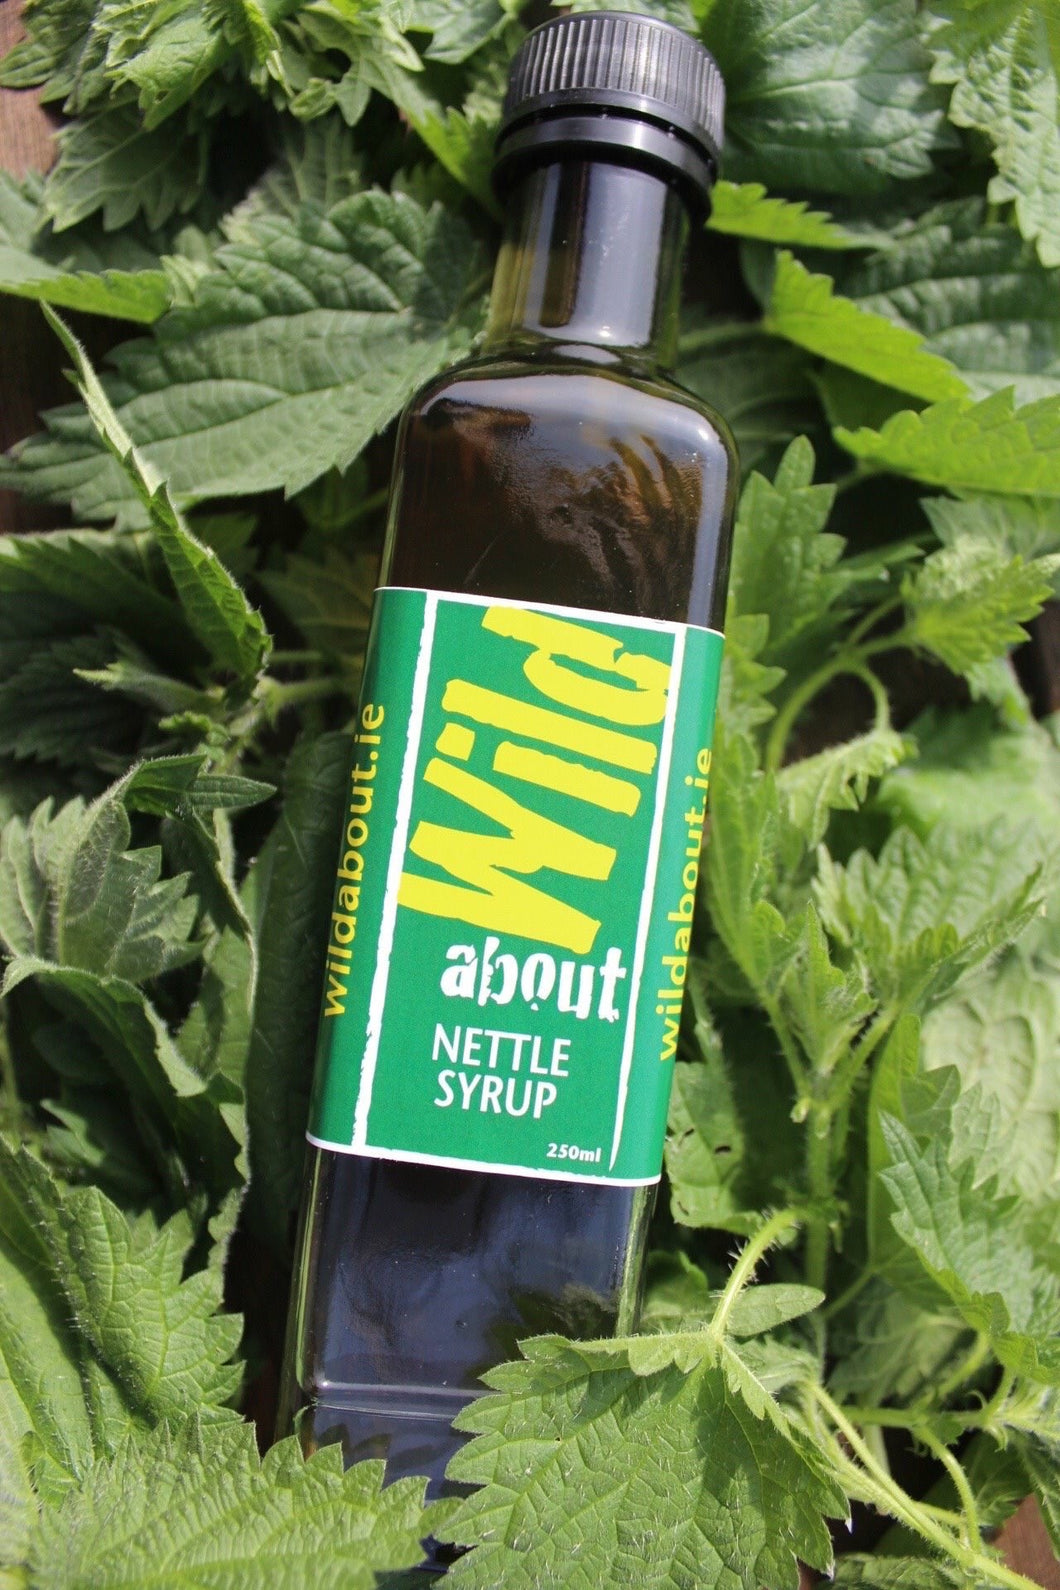 Wild About - Nettle Syrup 250ml